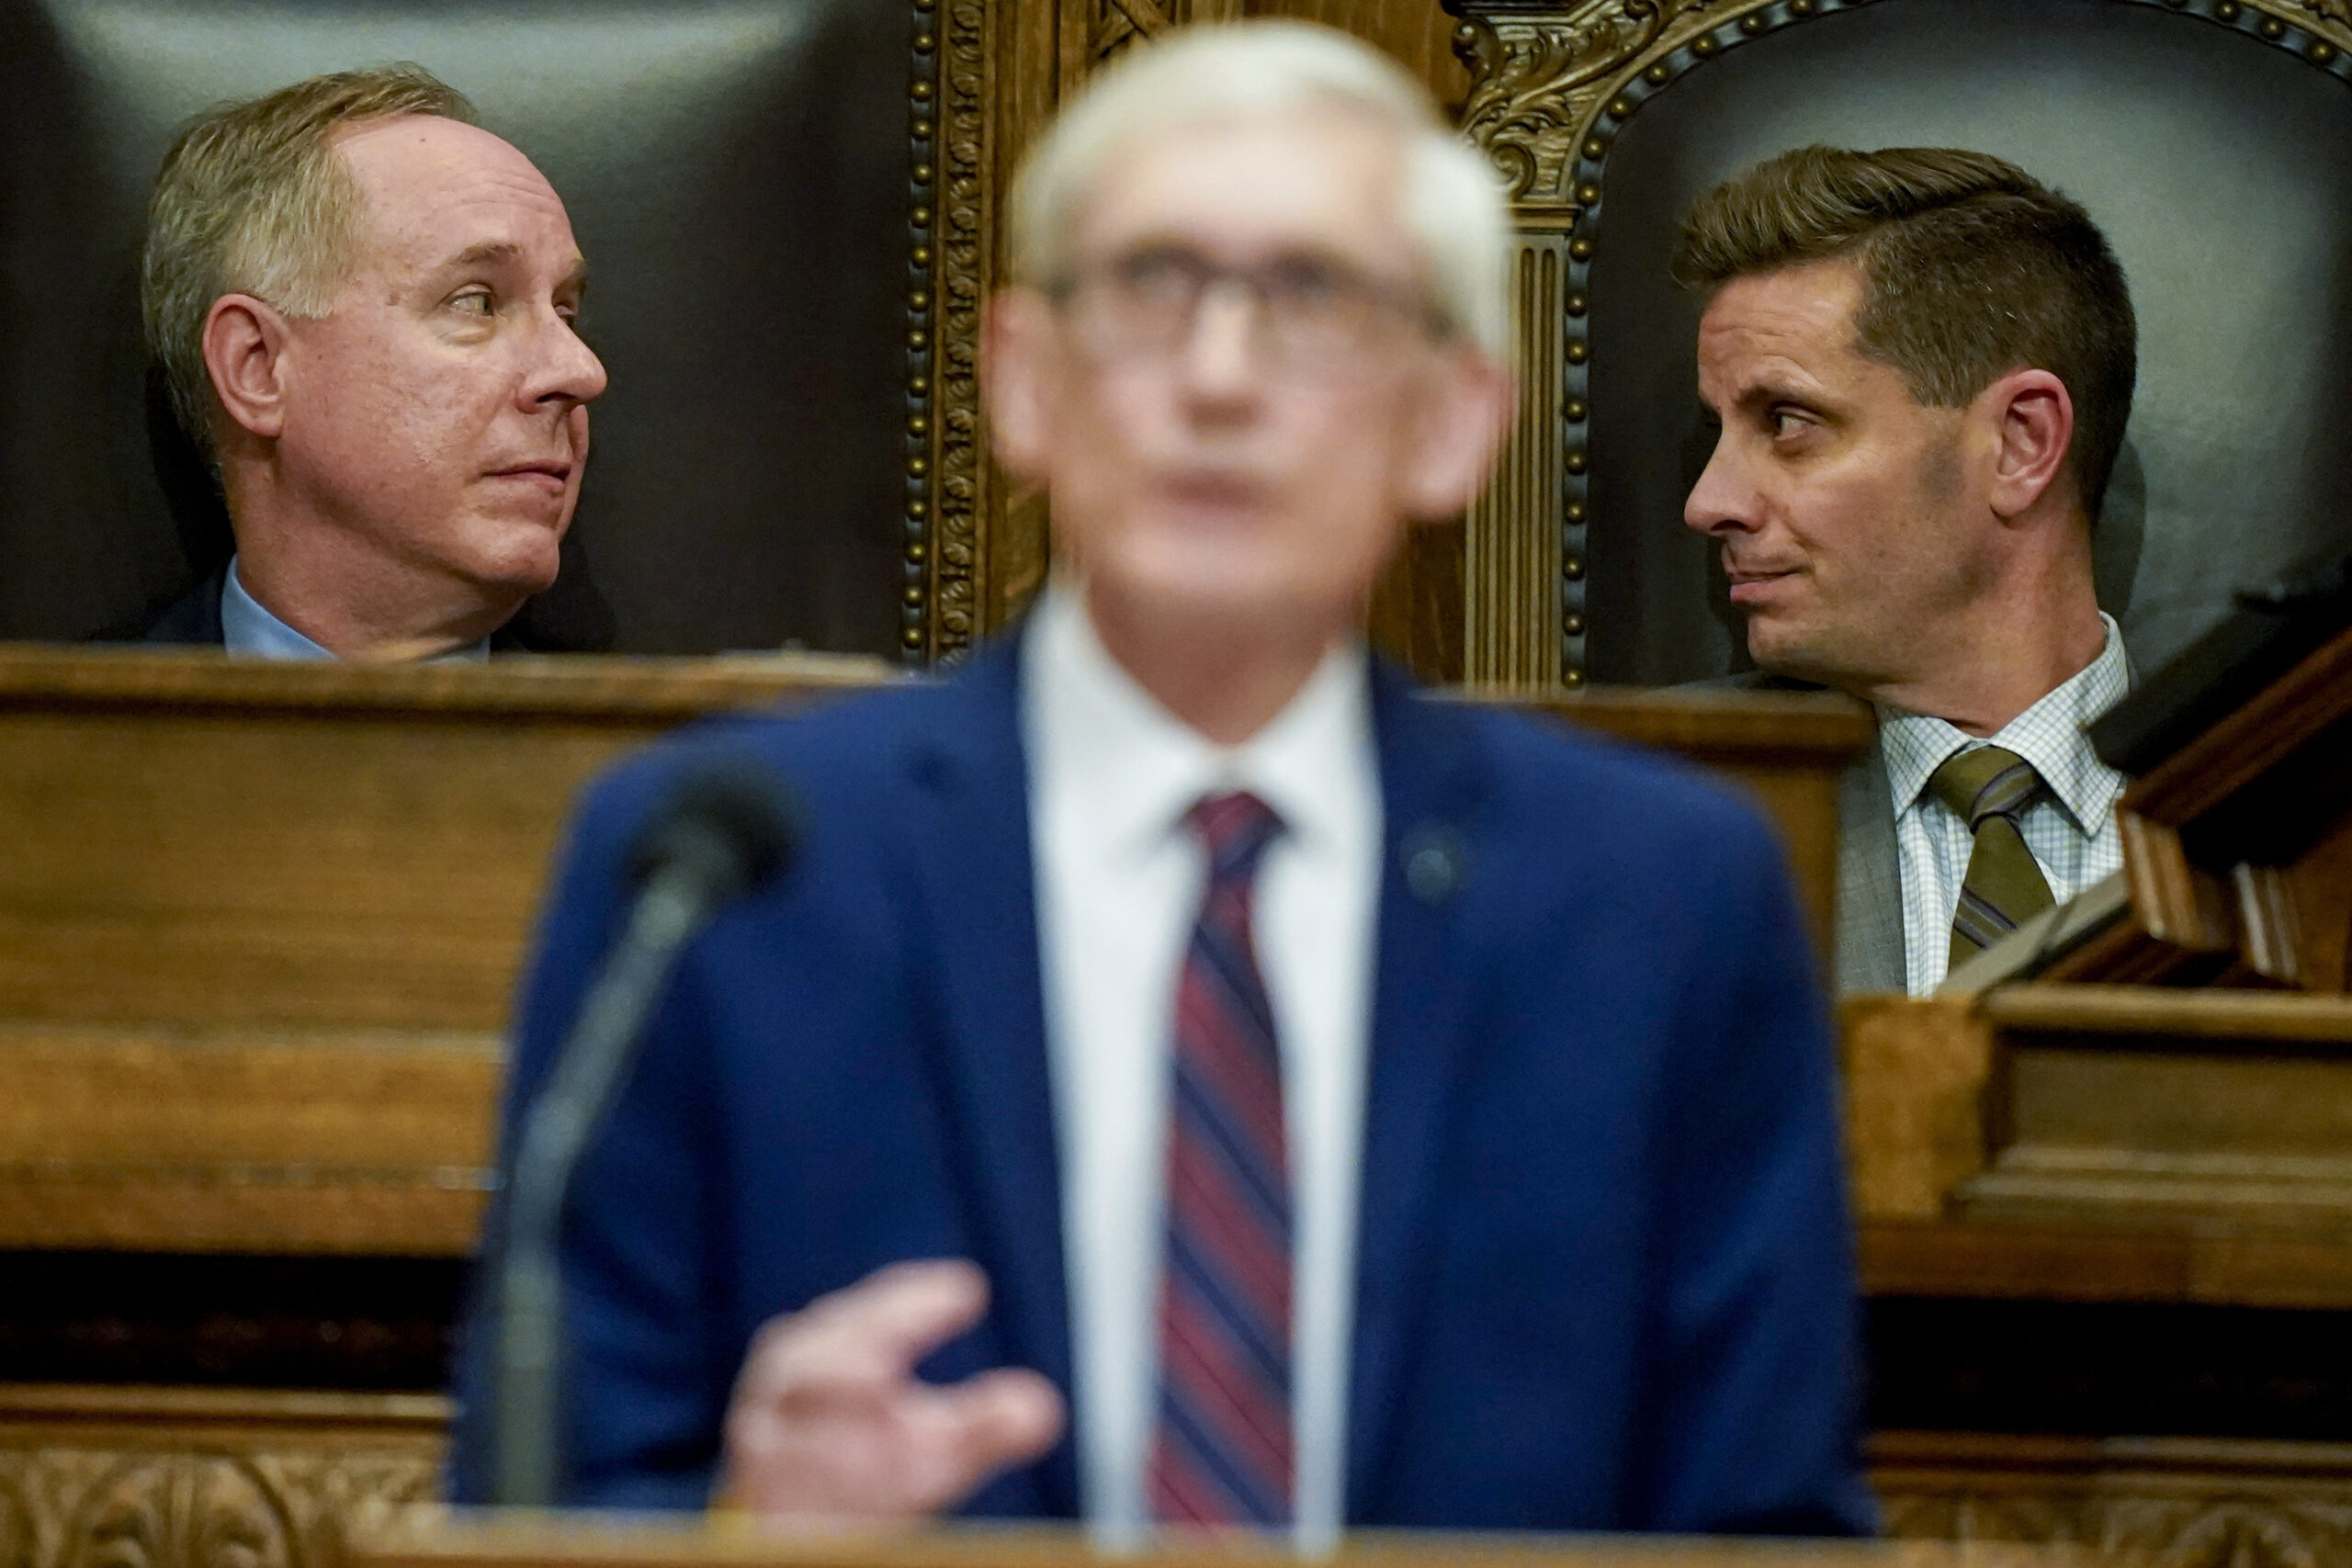 Gov. Tony Evers calls special session to address child care, workforce challenges